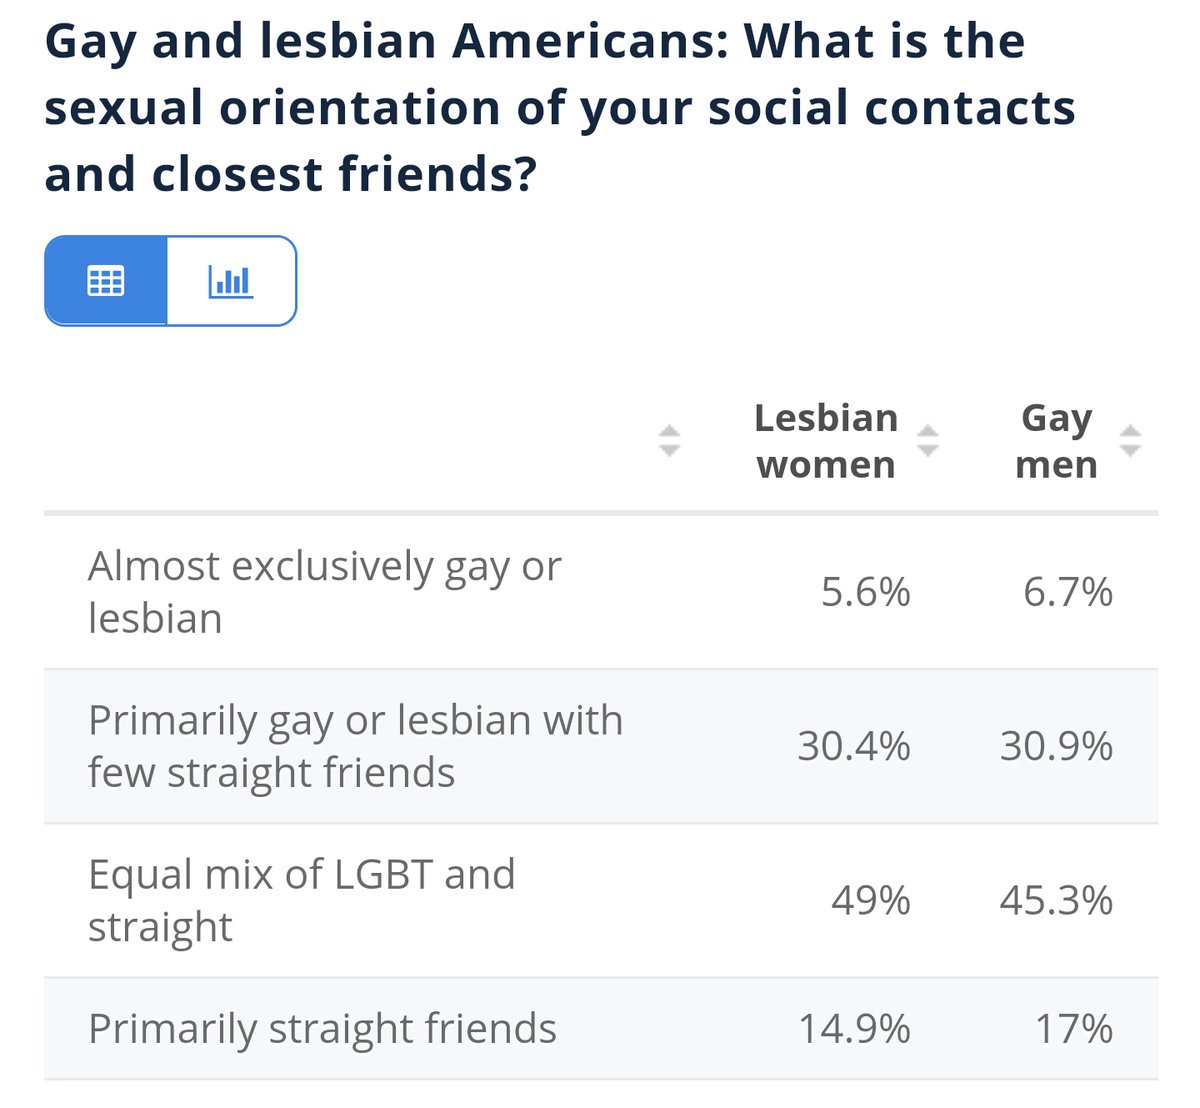 I feel like queer characters don't have enough queer friends/queer social life on a lot of shows, although this might be explained by selection effects.